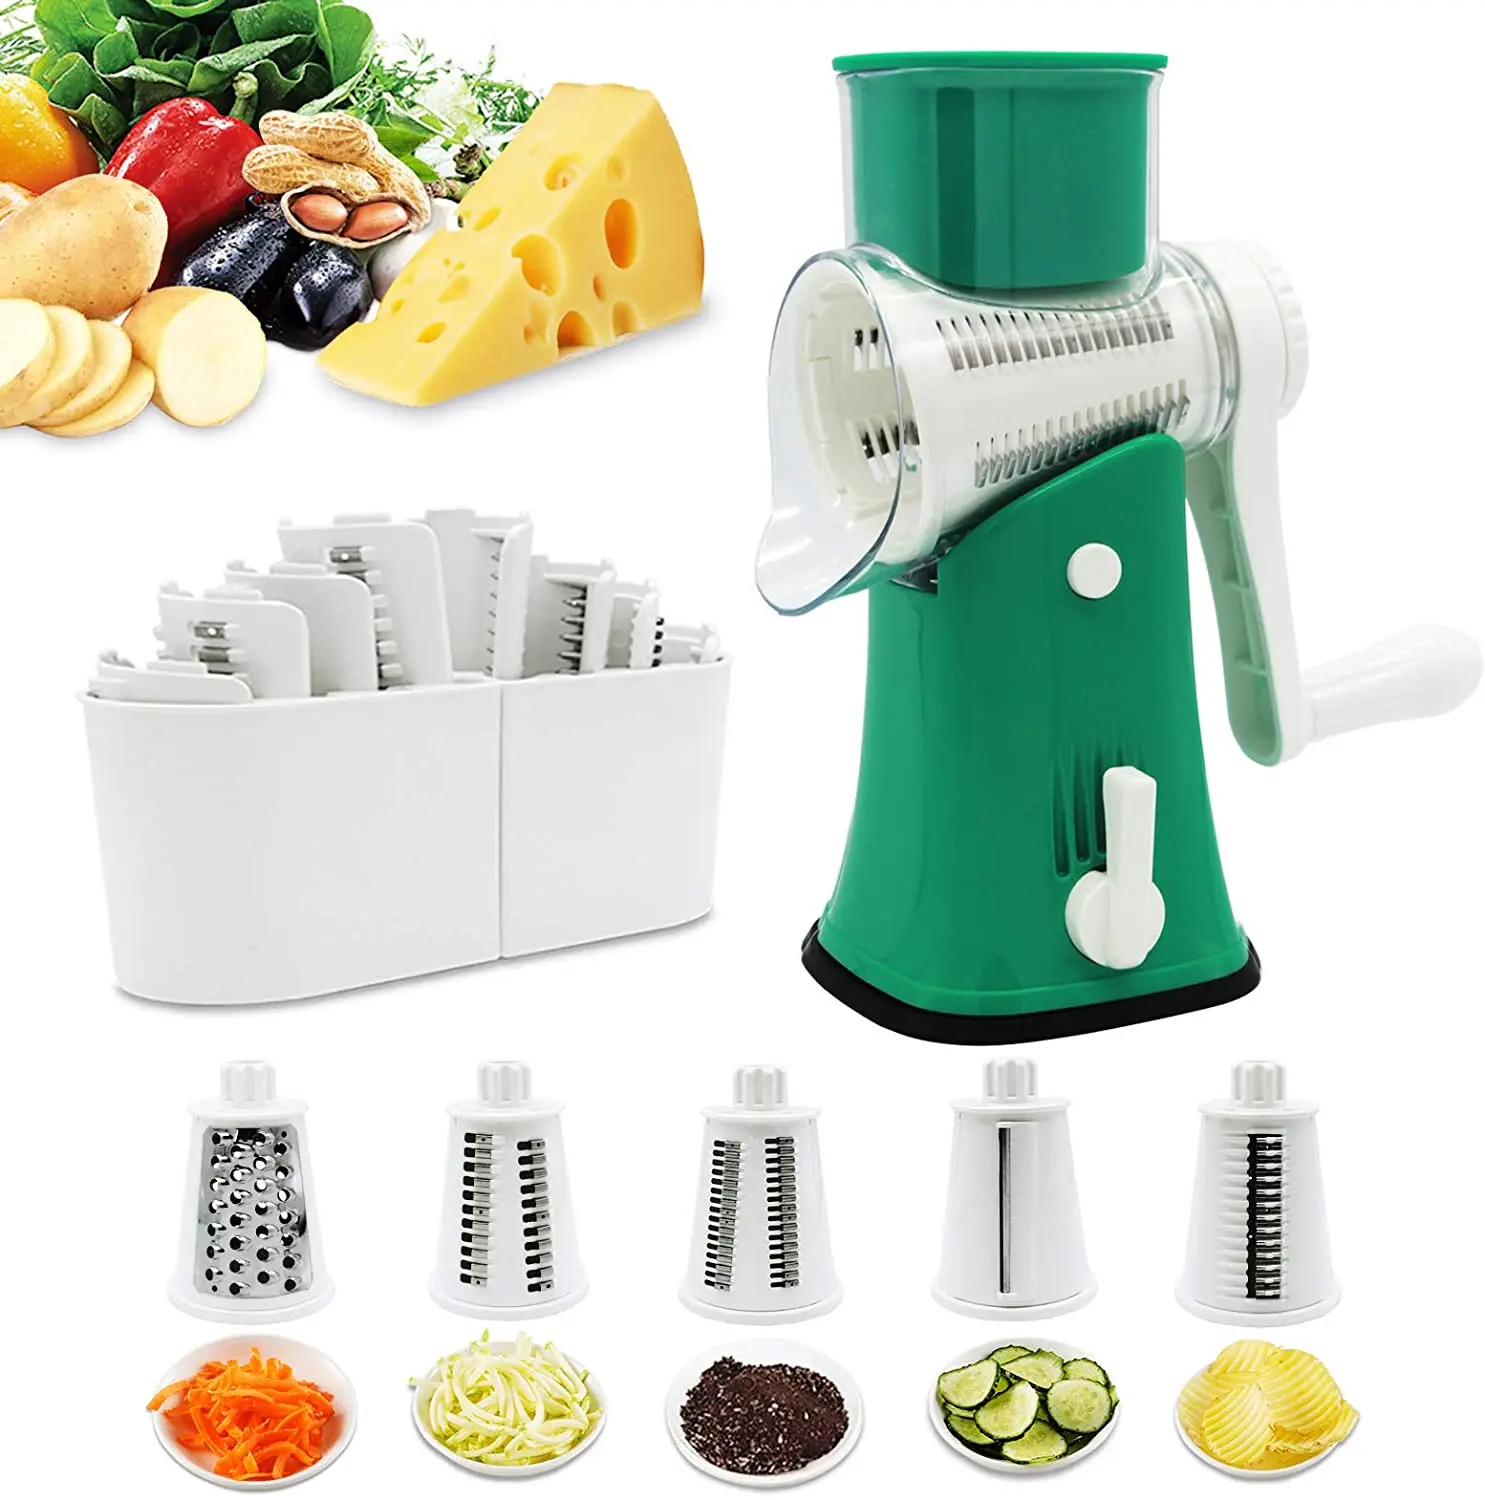 

NEW multi function handheld shredder food kitchen accessory mandoline slicer vegetable cutter online 5 in 1 cheese rotary grater, Black and white